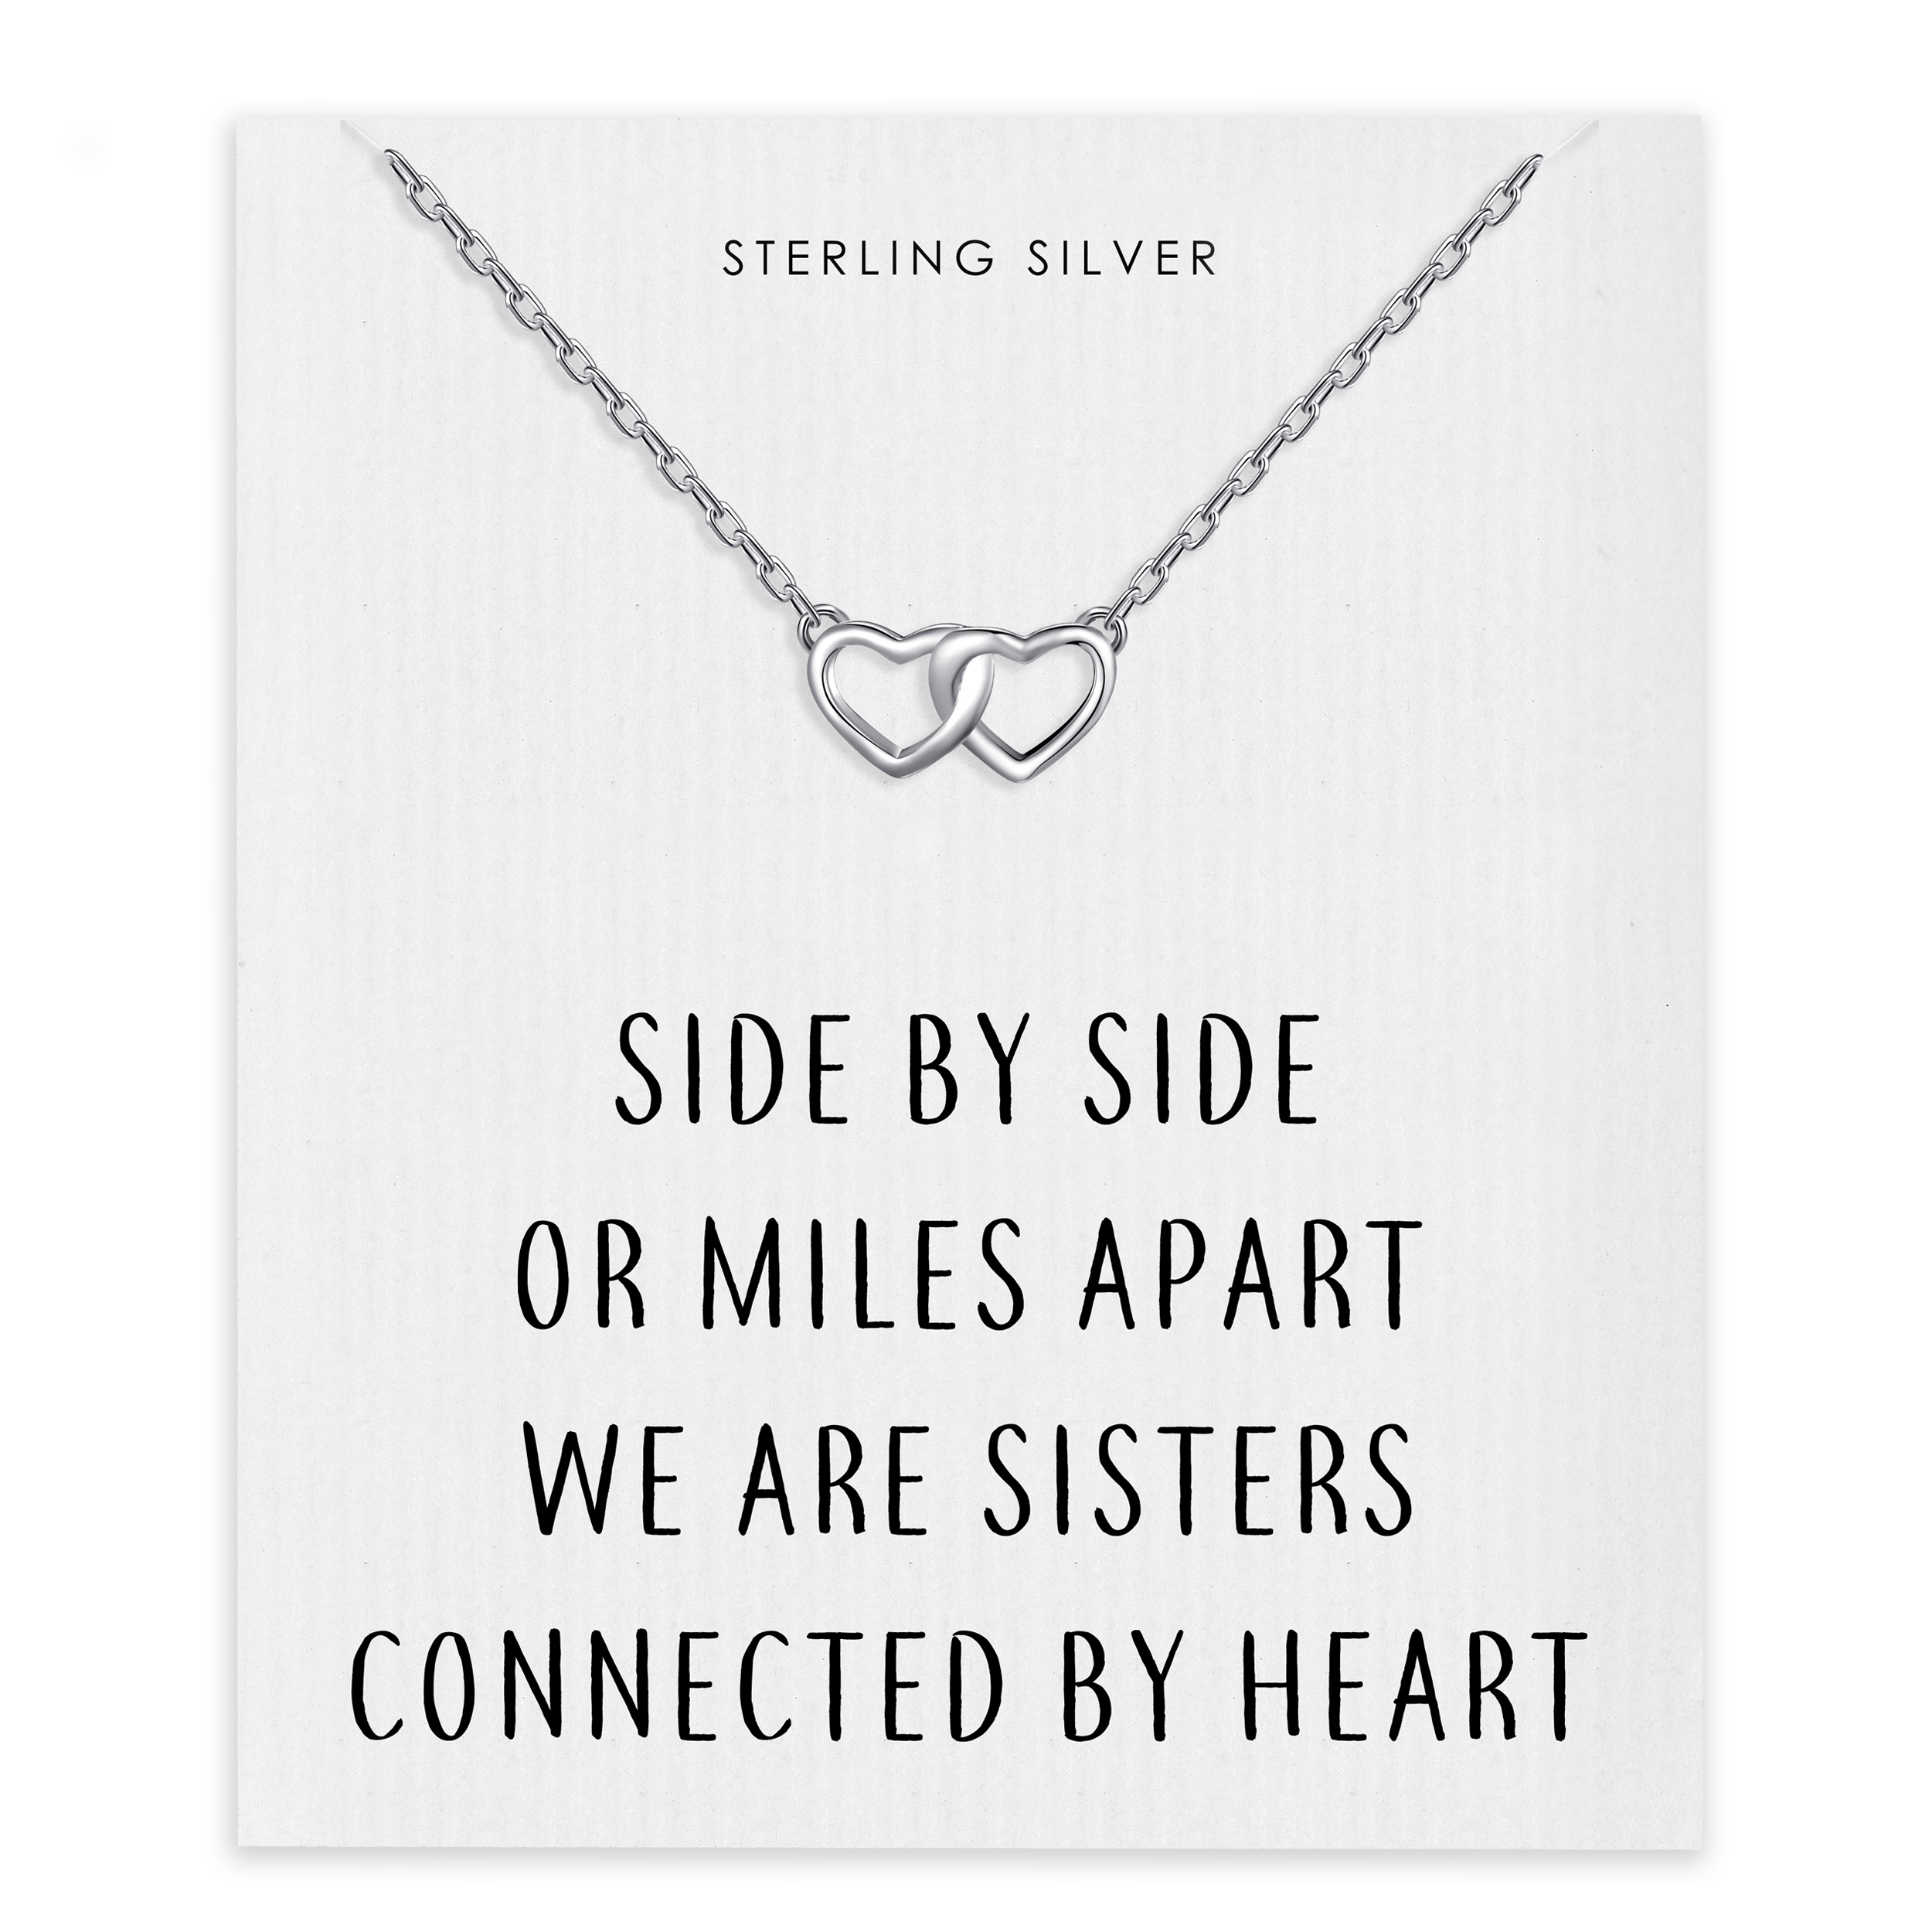 Sterling Silver Sister Heart Link Necklace with Quote Card by Philip Jones Jewellery